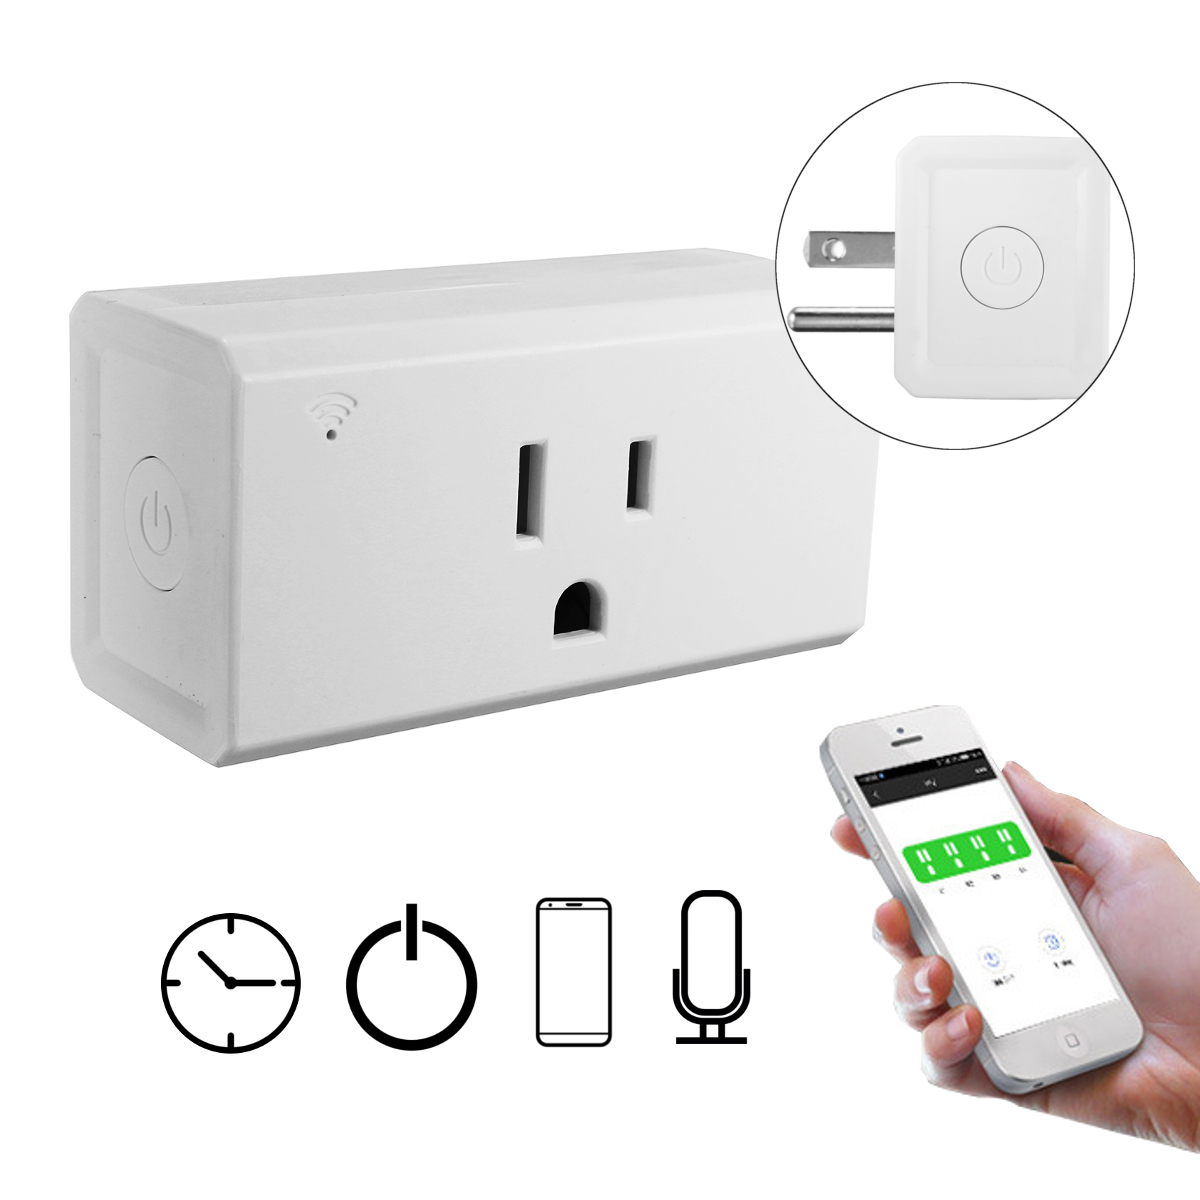 Excellwayreg-Wifi-Smart-Plug-Smart-Socket-Outlet-Compatible-with-Alexa-and-Google-Home-Voice-Control-1258076-8